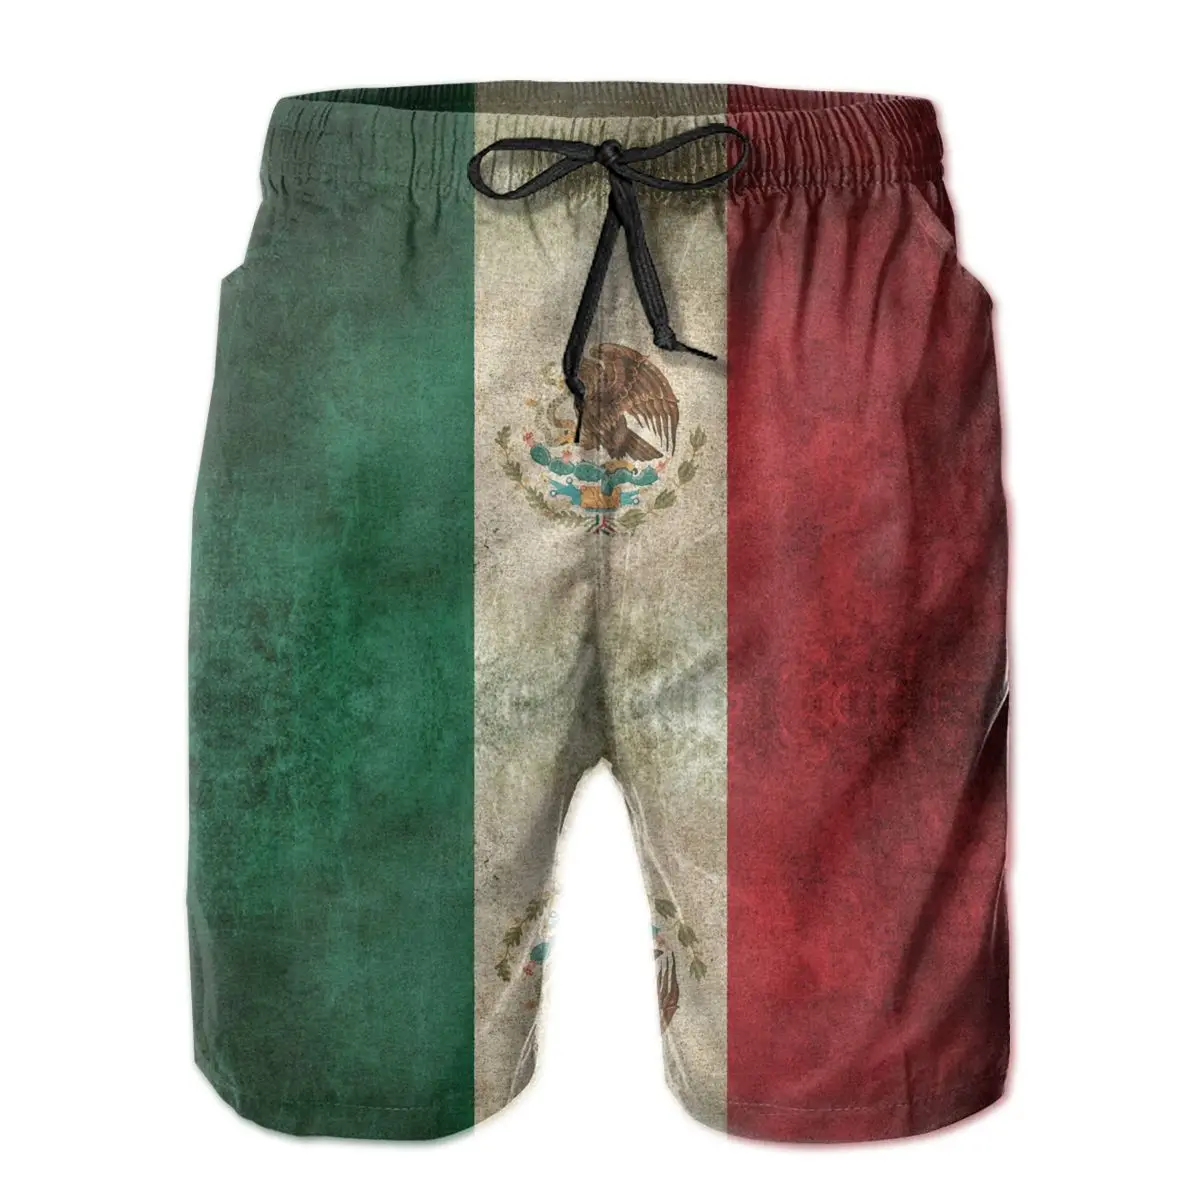 

R333 Sports Old And Worn Distressed Vintage Flag Of Mexico Short Breathable Quick Dry Funny Novelty Hawaii Pants